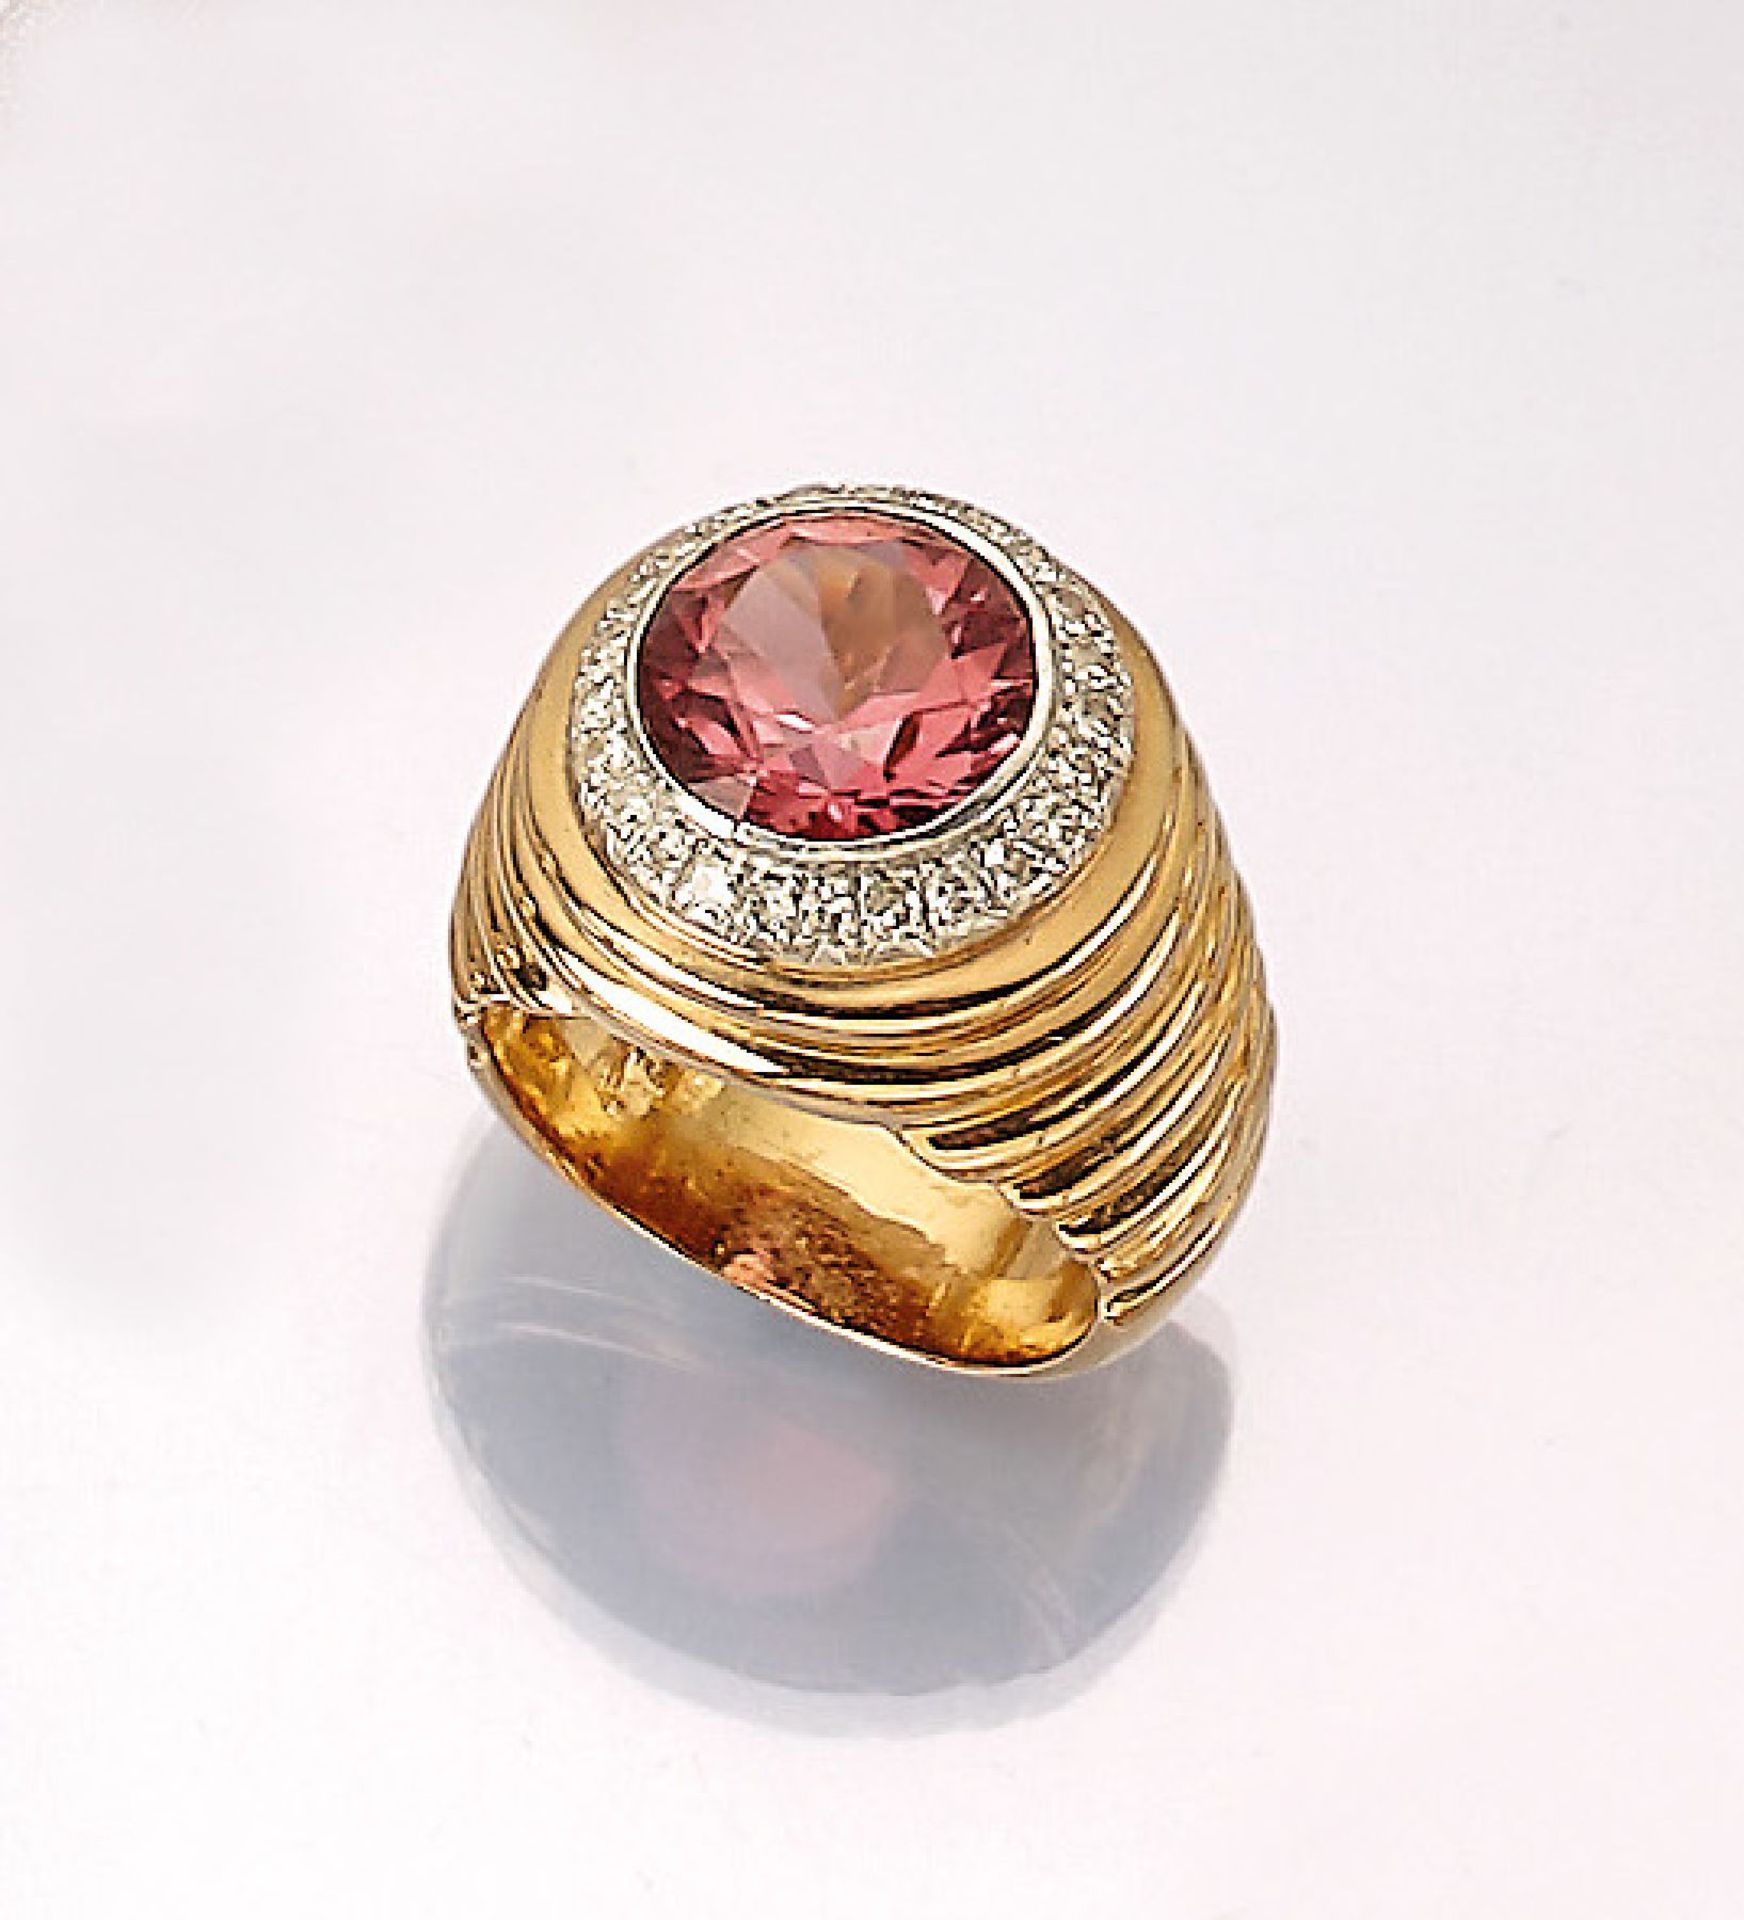 18 kt gold ring with tourmaline and brilliants , YG 750/000, brilliant cut tourmaline approx. 7.0 ct